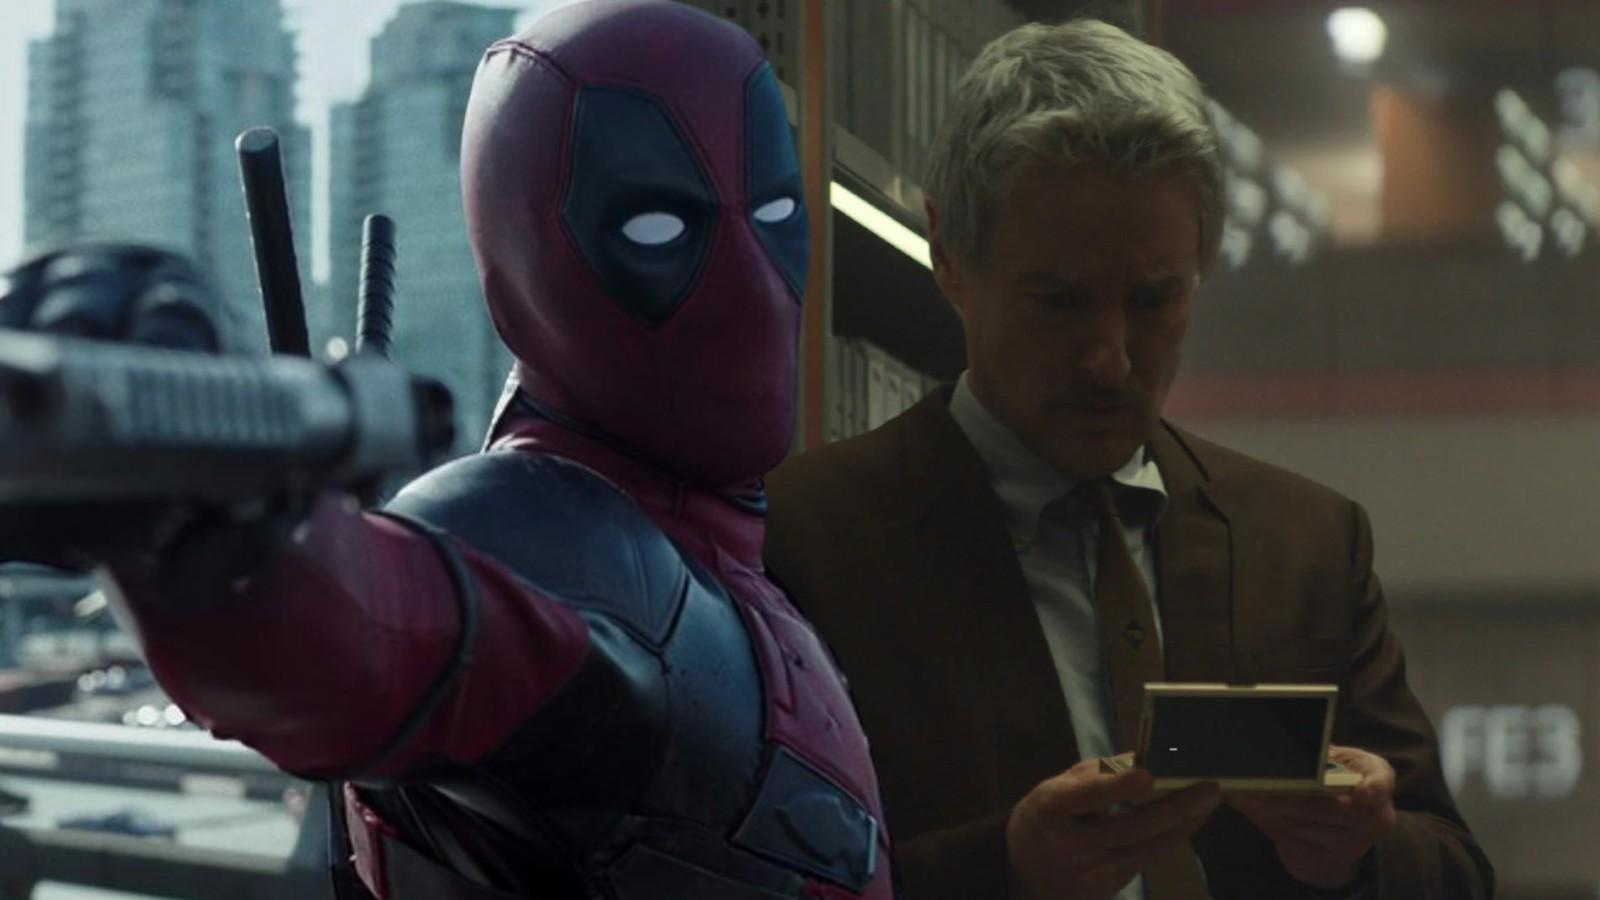 A still from Deadpool and Owen Wilson's Agent Mobius with a time travel TemPad